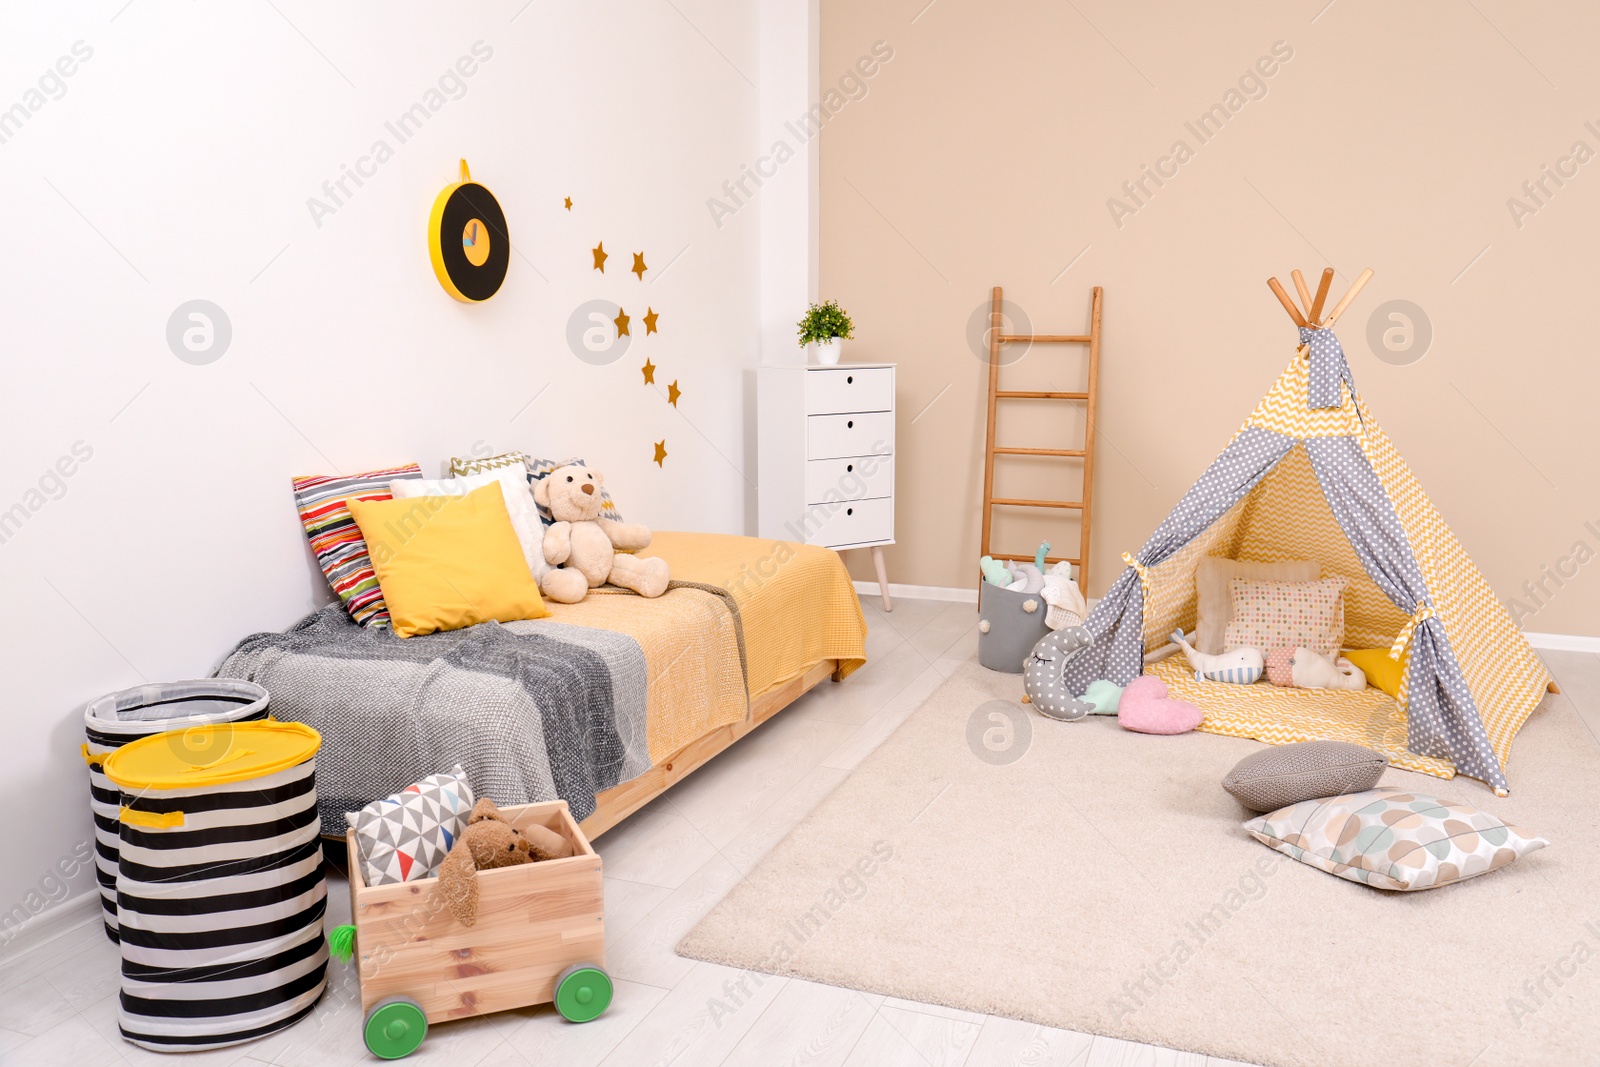 Photo of Cozy child room interior with bed, play tent and modern decor elements